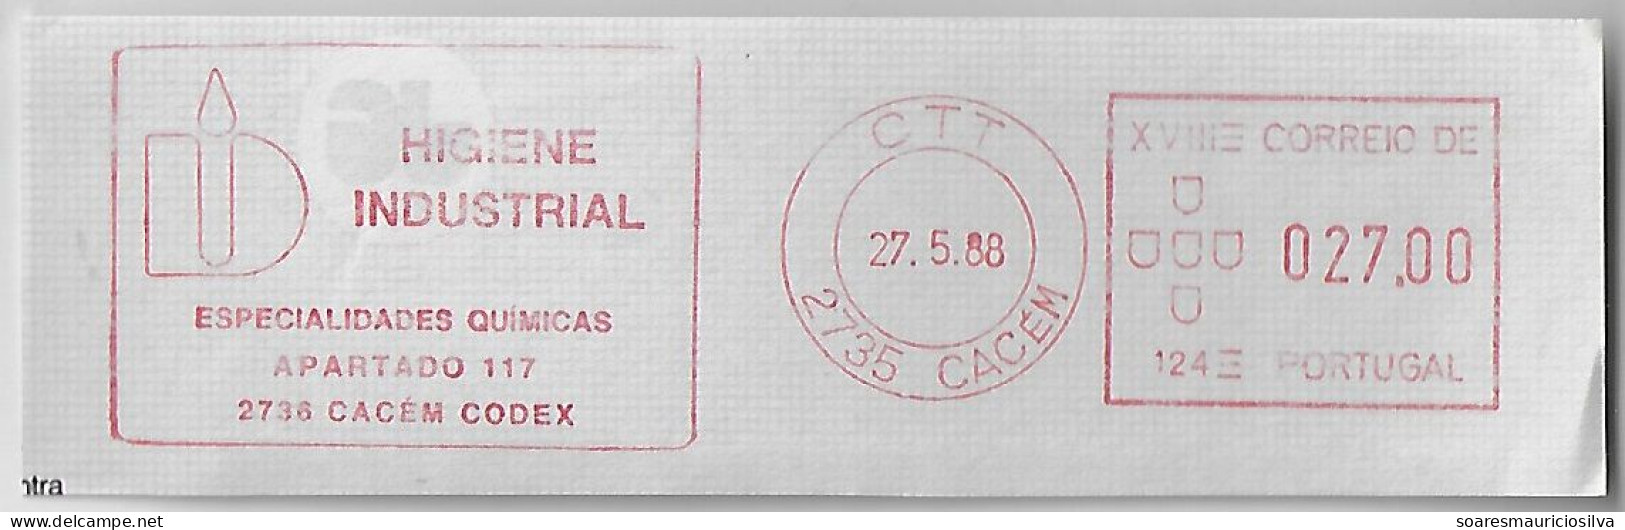 Portugal 1988 Cover Fragment Meter Stamp Hasler Mailmaster Slogan Industrial Hygiene Chemical Specialties From Cacém - Covers & Documents